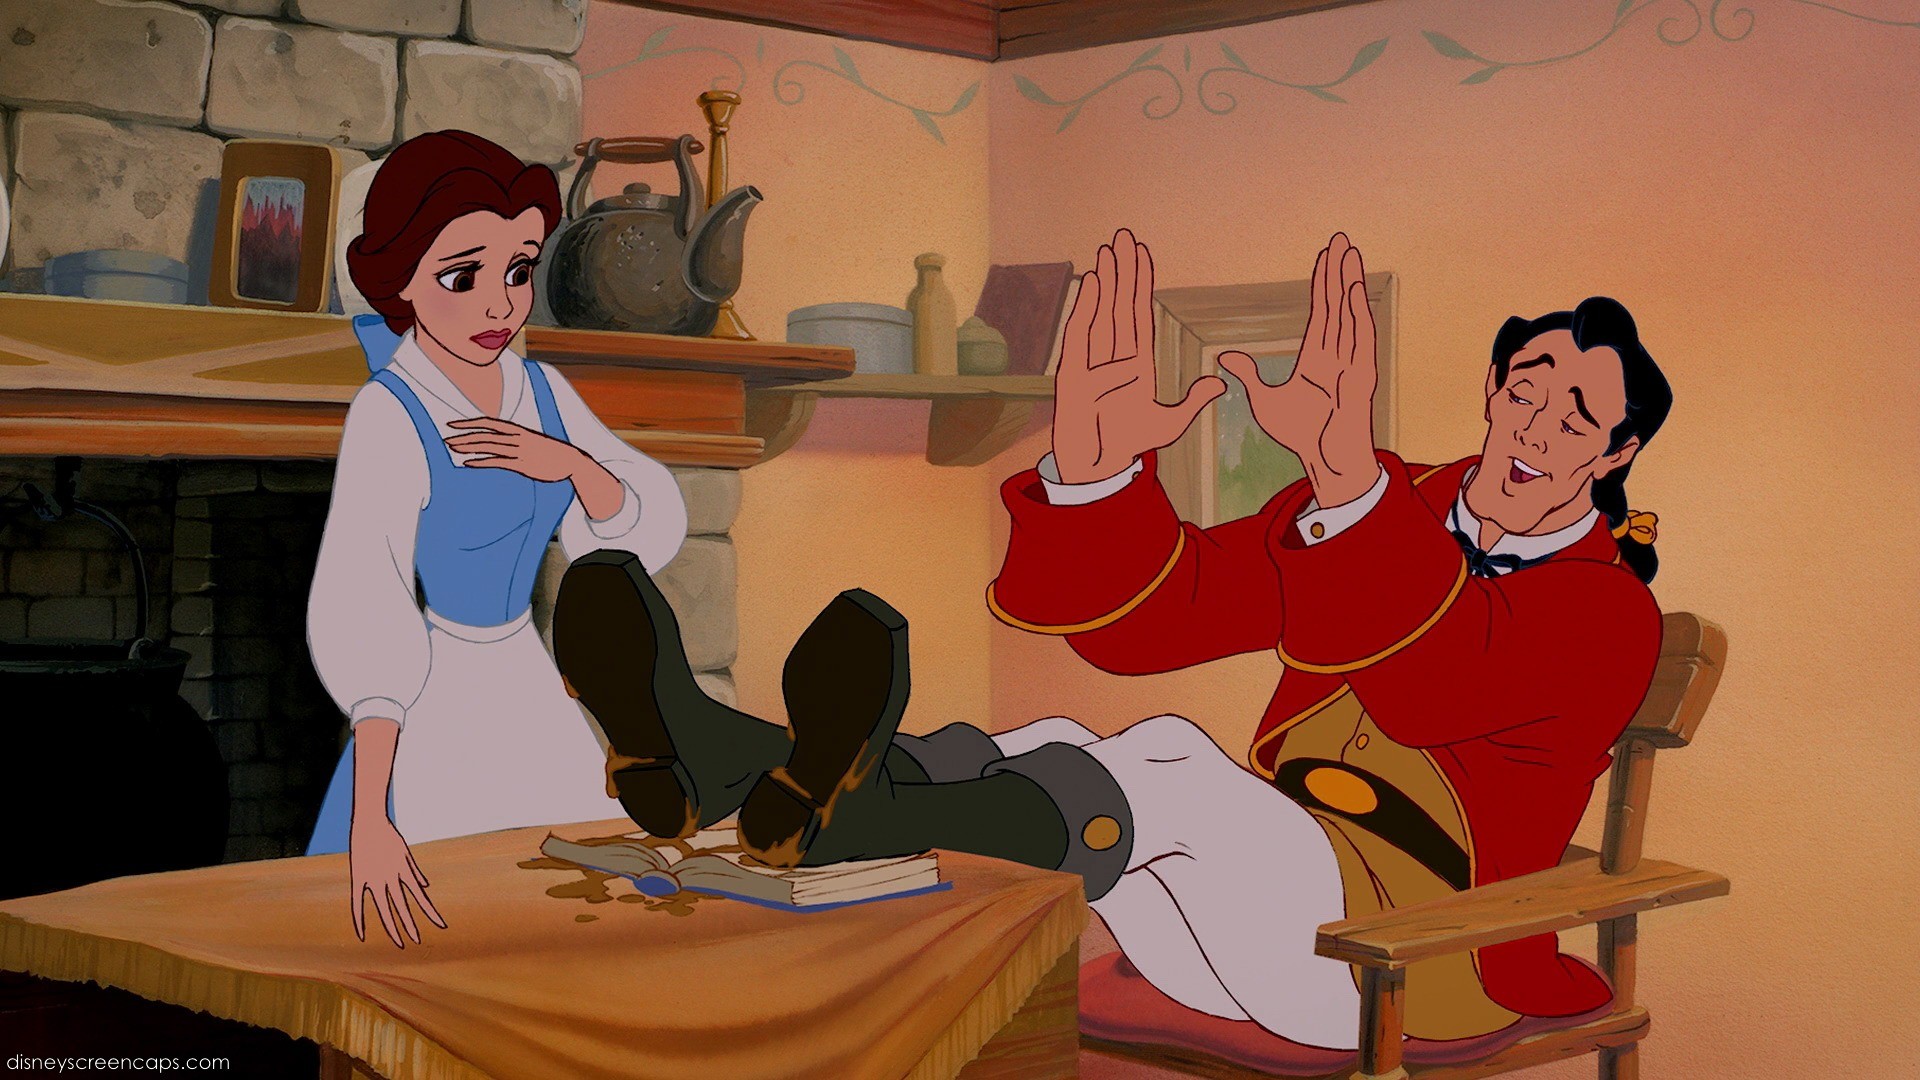 1920x1080 Belle and Pocahontas images Belle and Gaston HD wallpaper and bac...